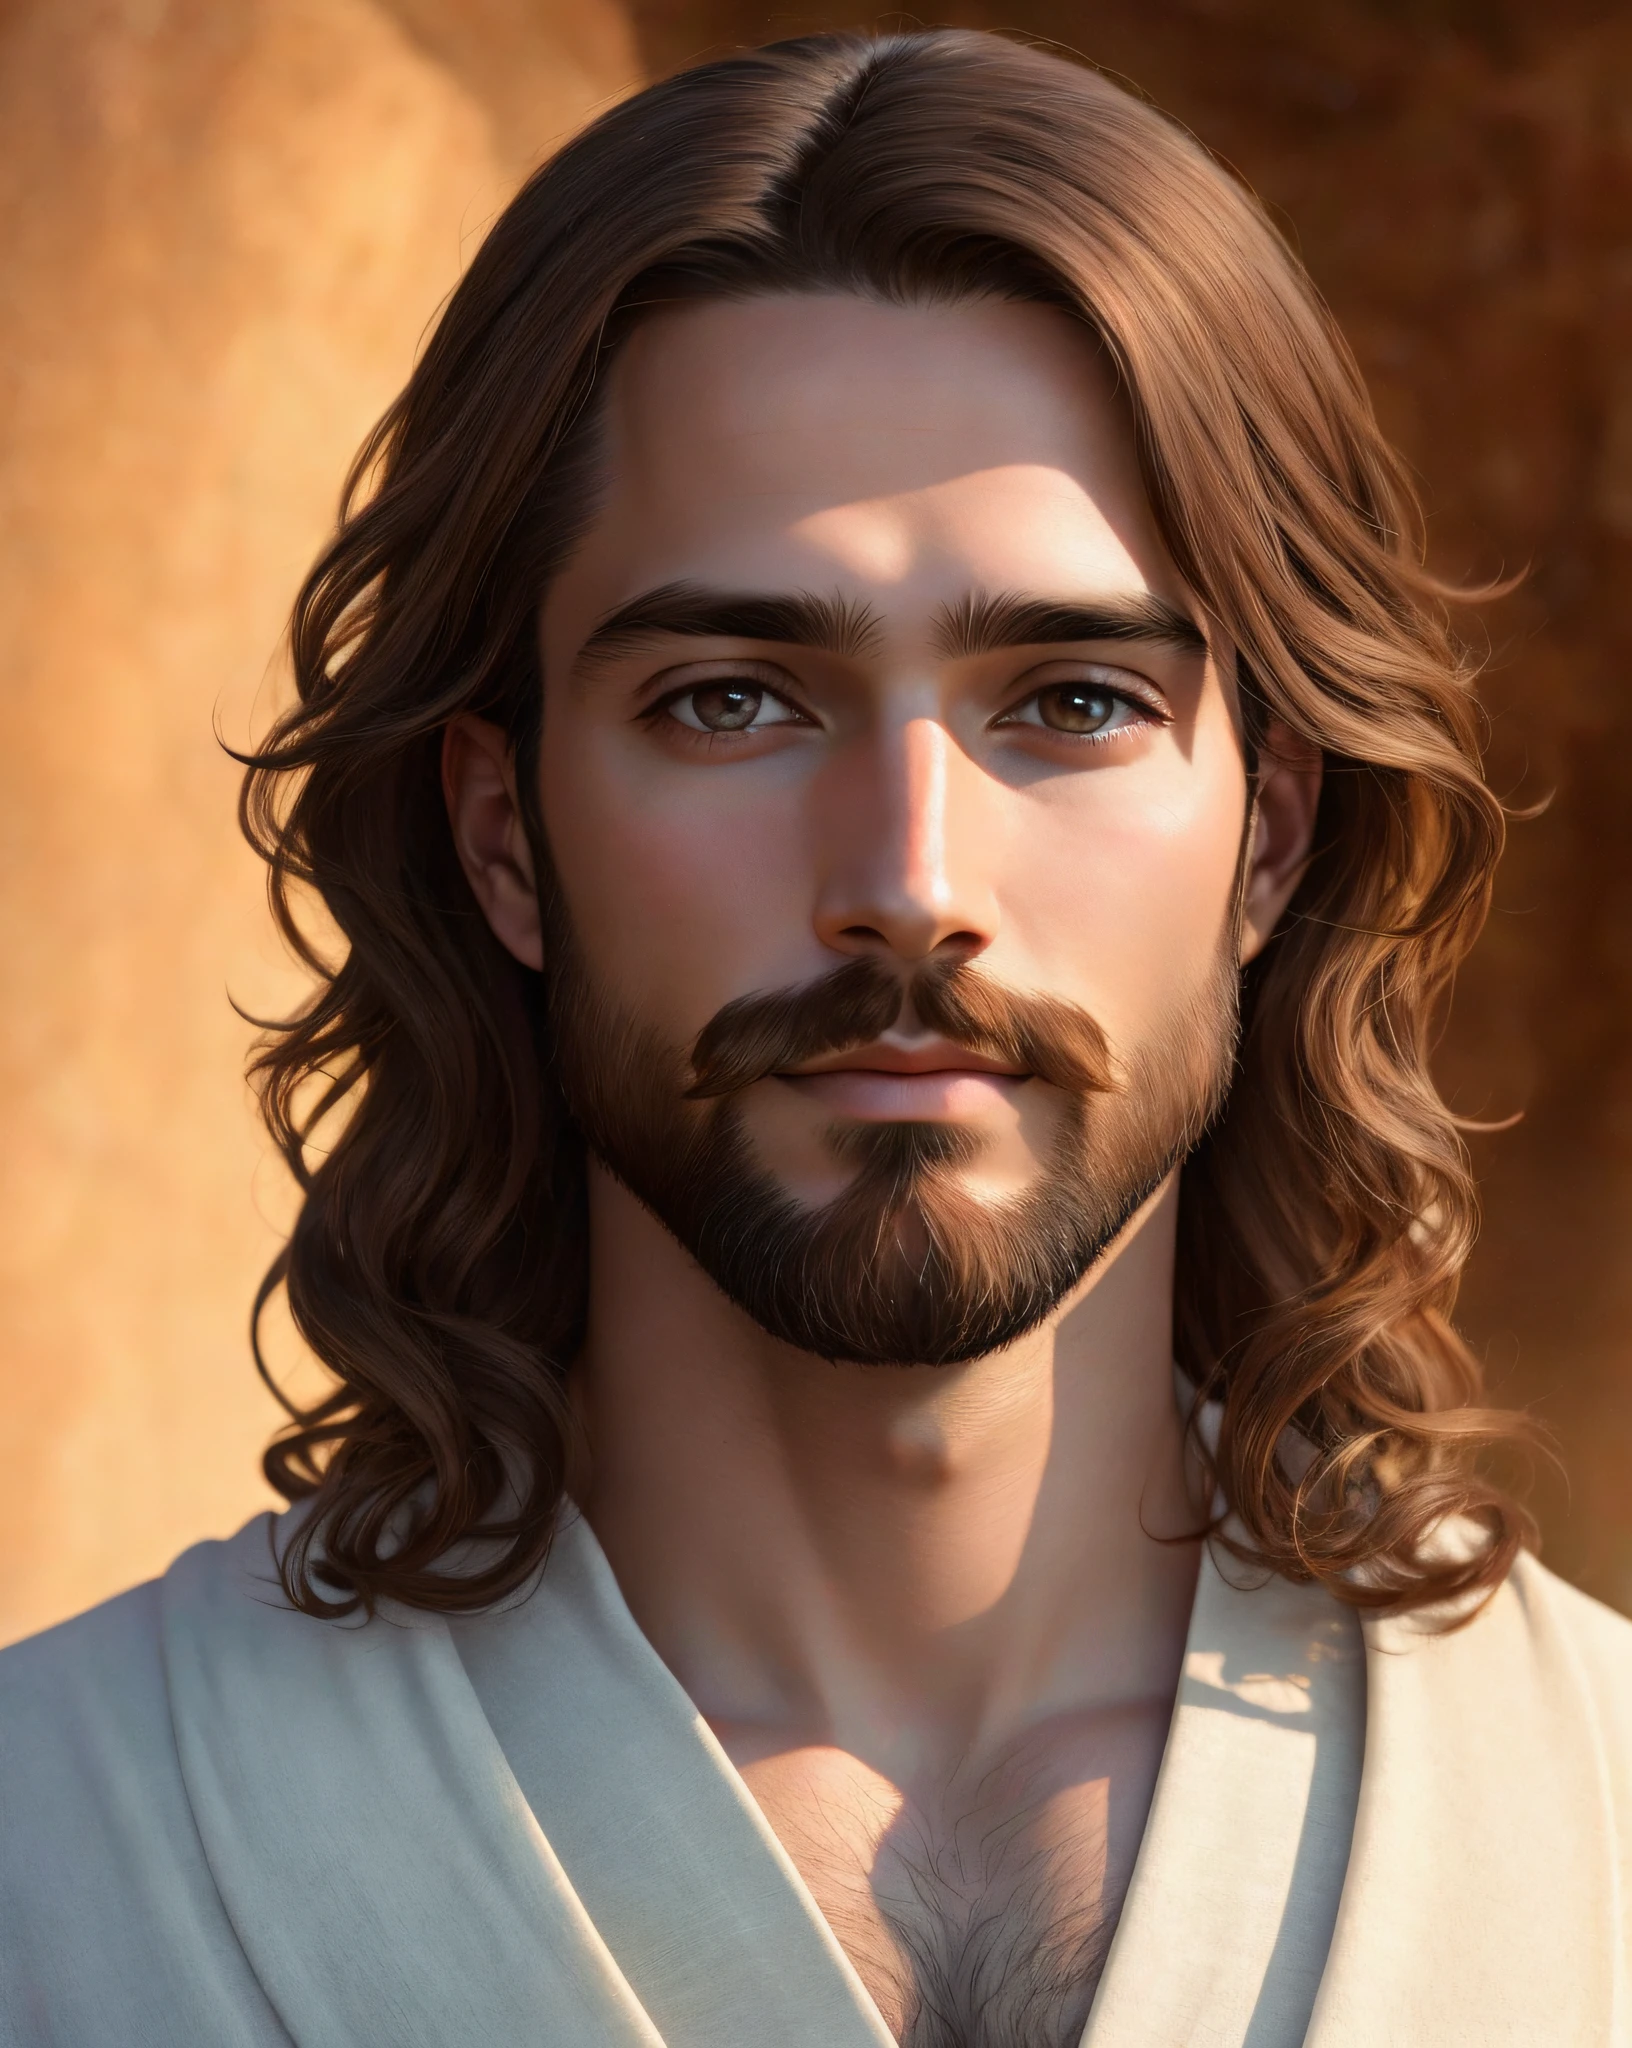 Realistic image of Jesus Christ, long hair, serene eyes, light brown beard and mustache, white robes